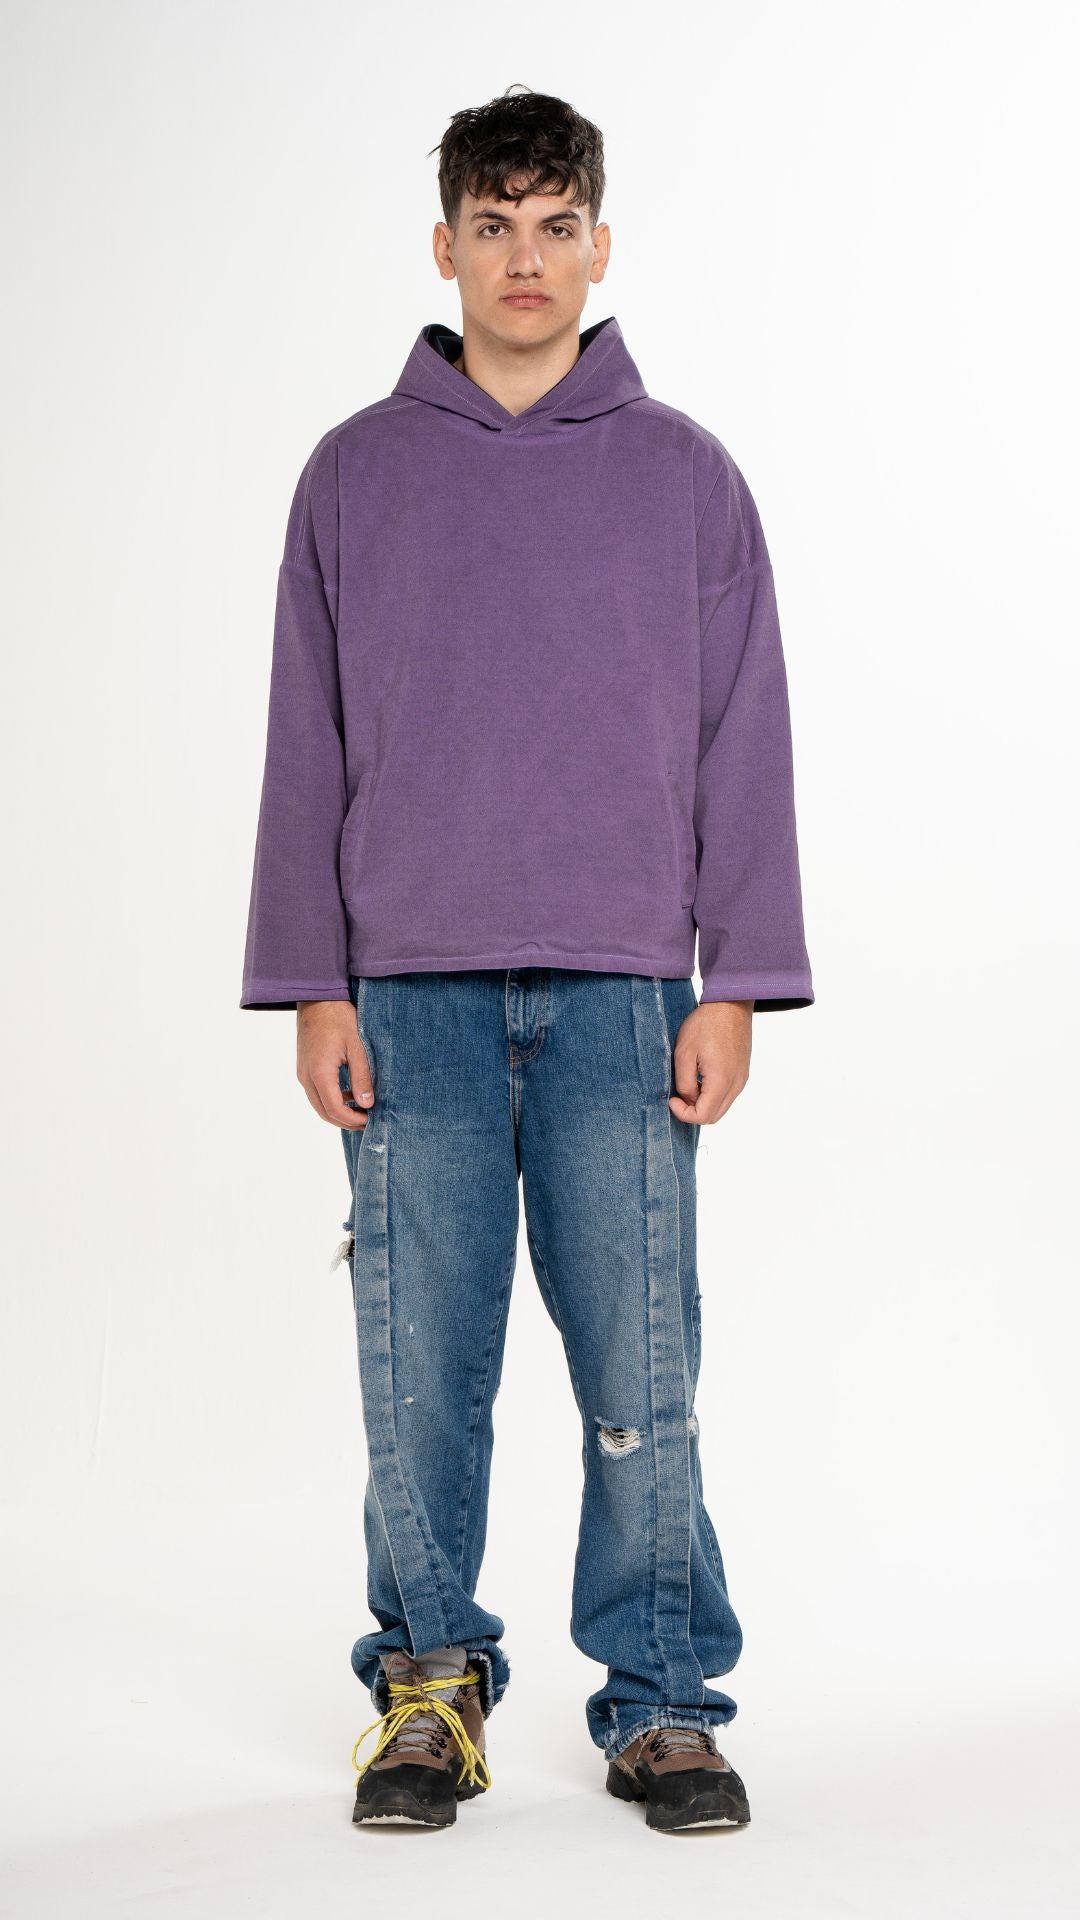 DOUBLE FACE HOODIE – Blue Navy/Washed Lilac